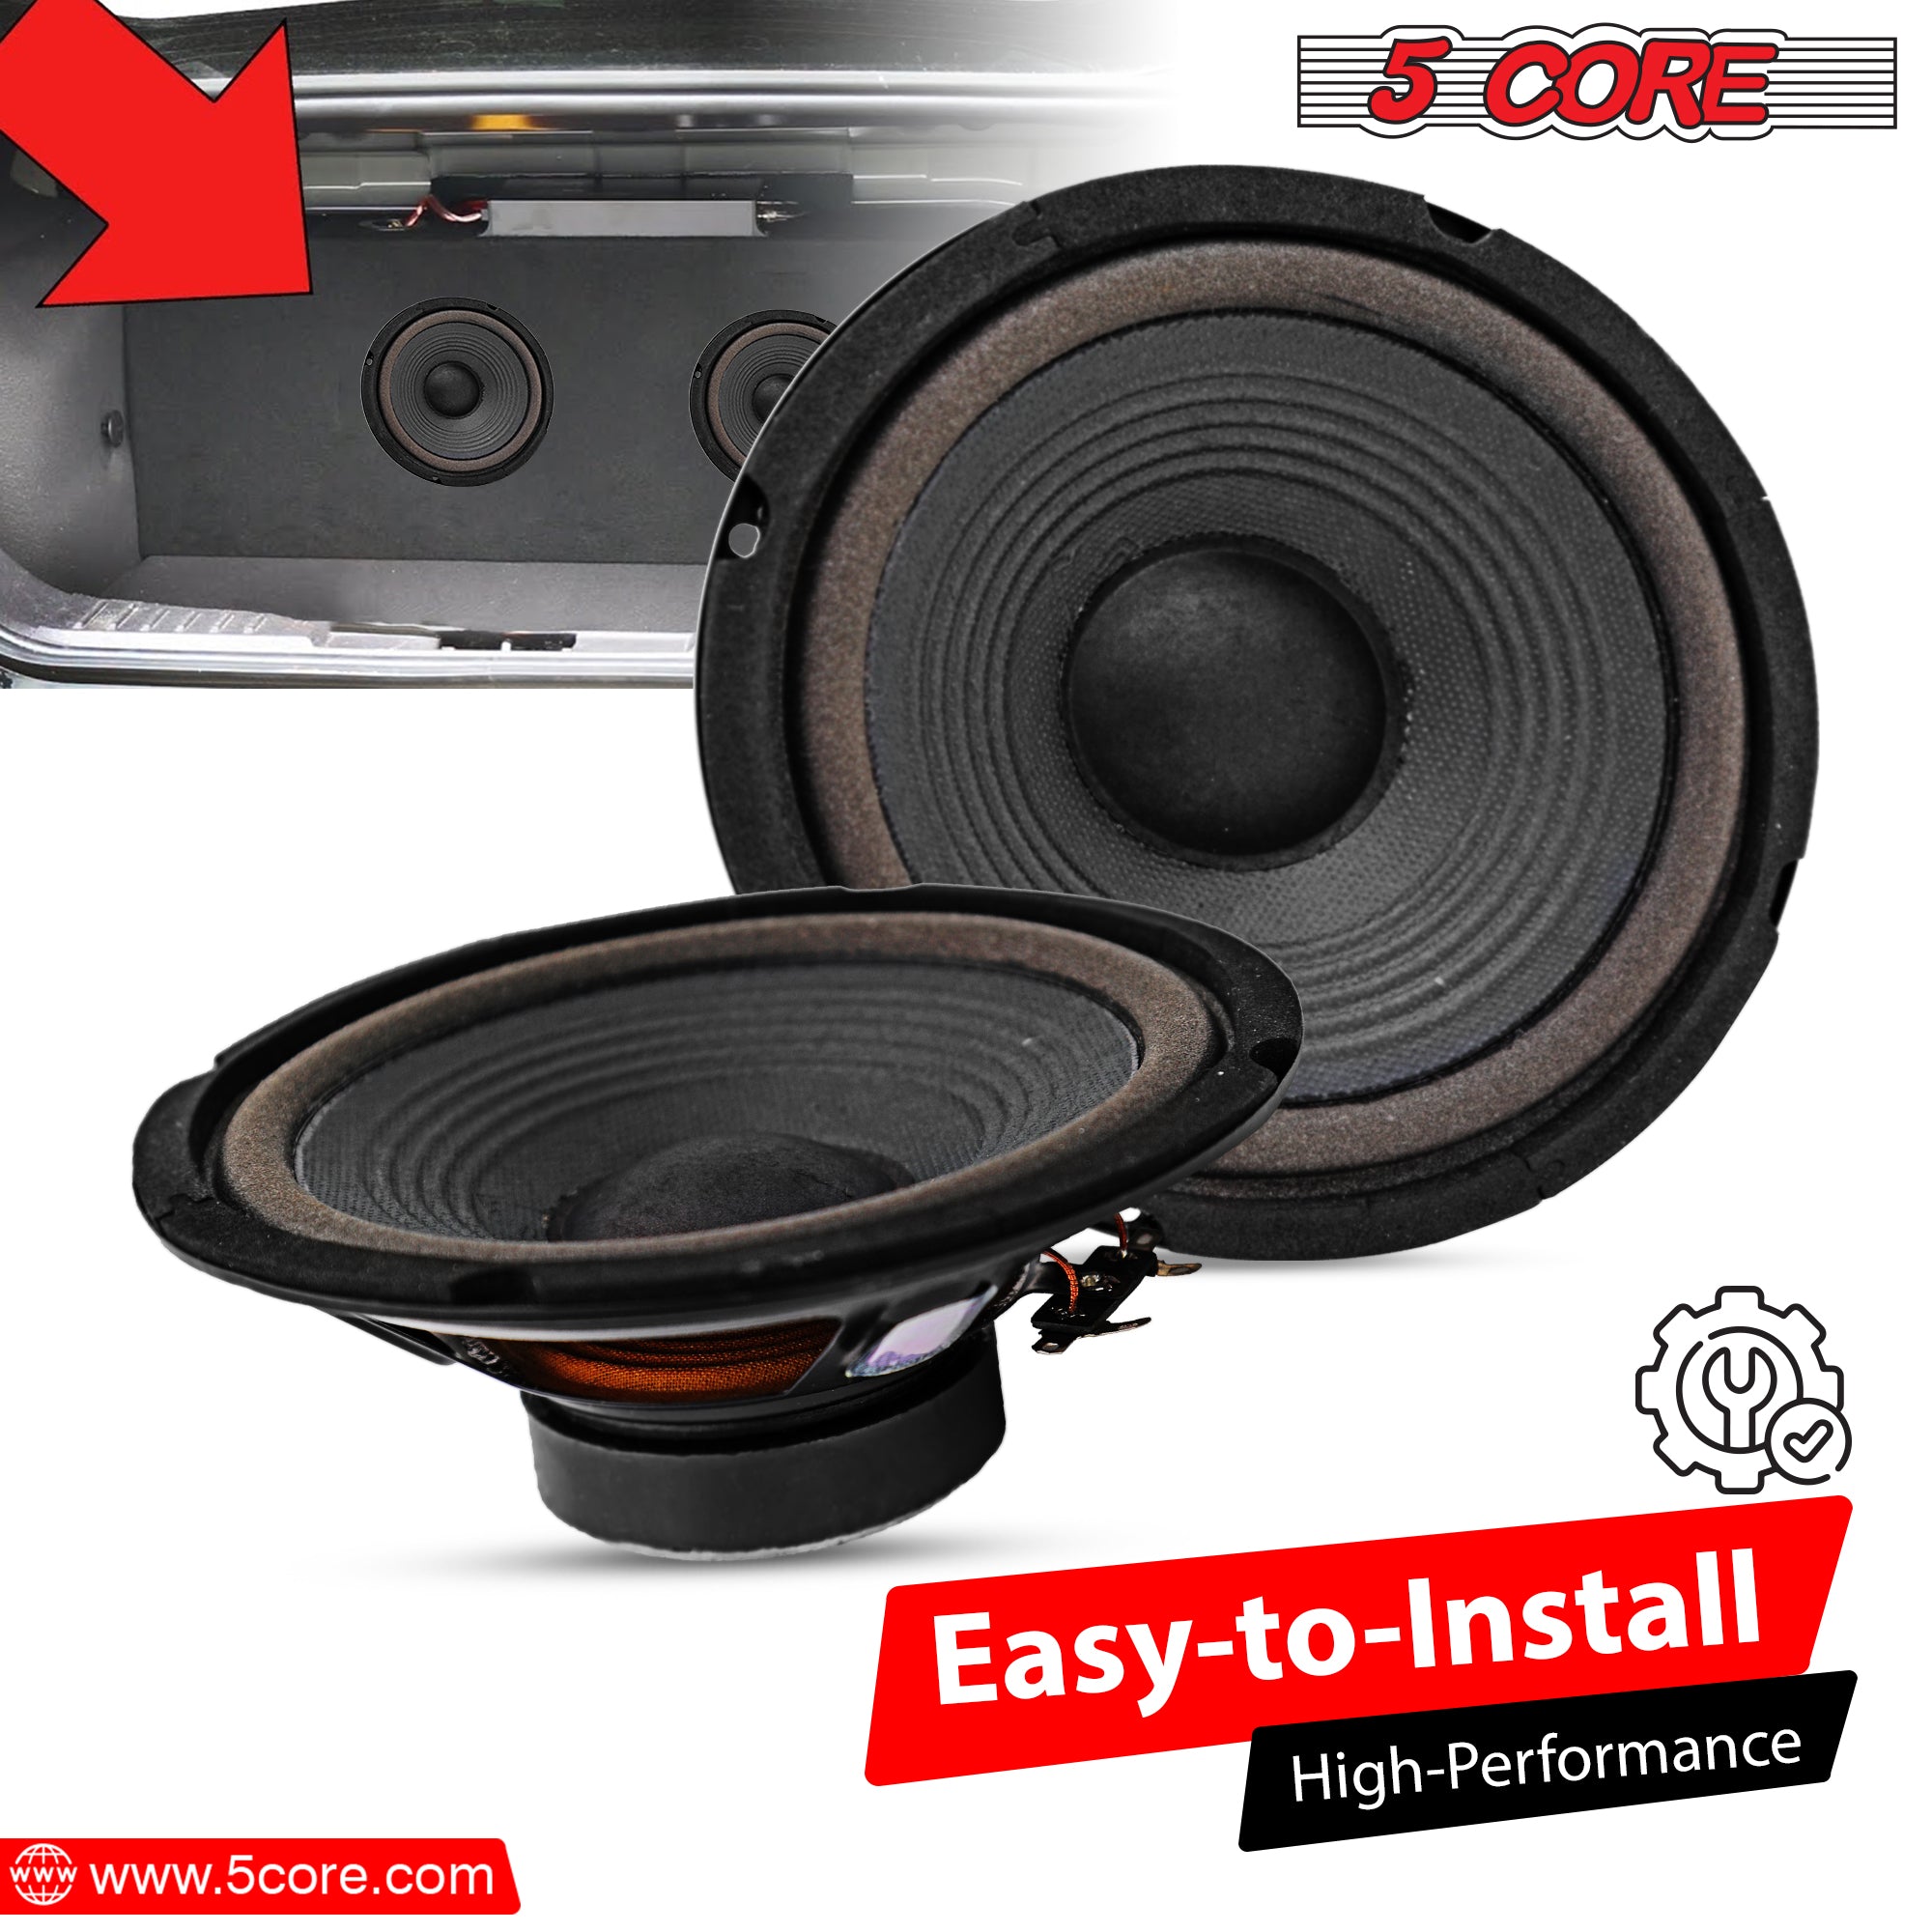 6 Inch Subwoofer are Easy to install